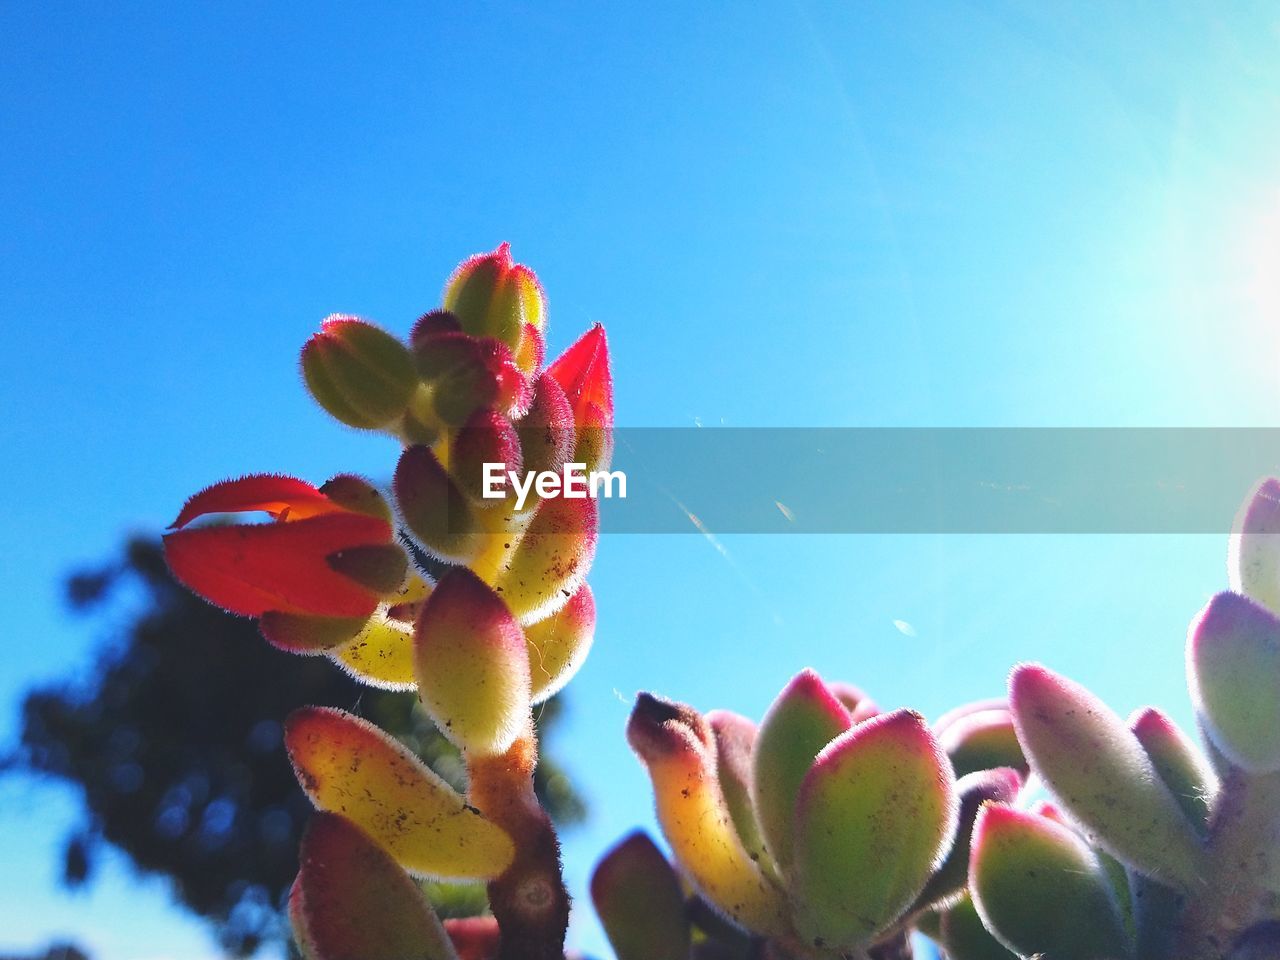 plant, flower, nature, sky, blue, macro photography, beauty in nature, succulent plant, petal, cactus, no people, growth, close-up, sunlight, freshness, day, clear sky, outdoors, red, sunny, flowering plant, prickly pear cactus, low angle view, multi colored, leaf, focus on foreground